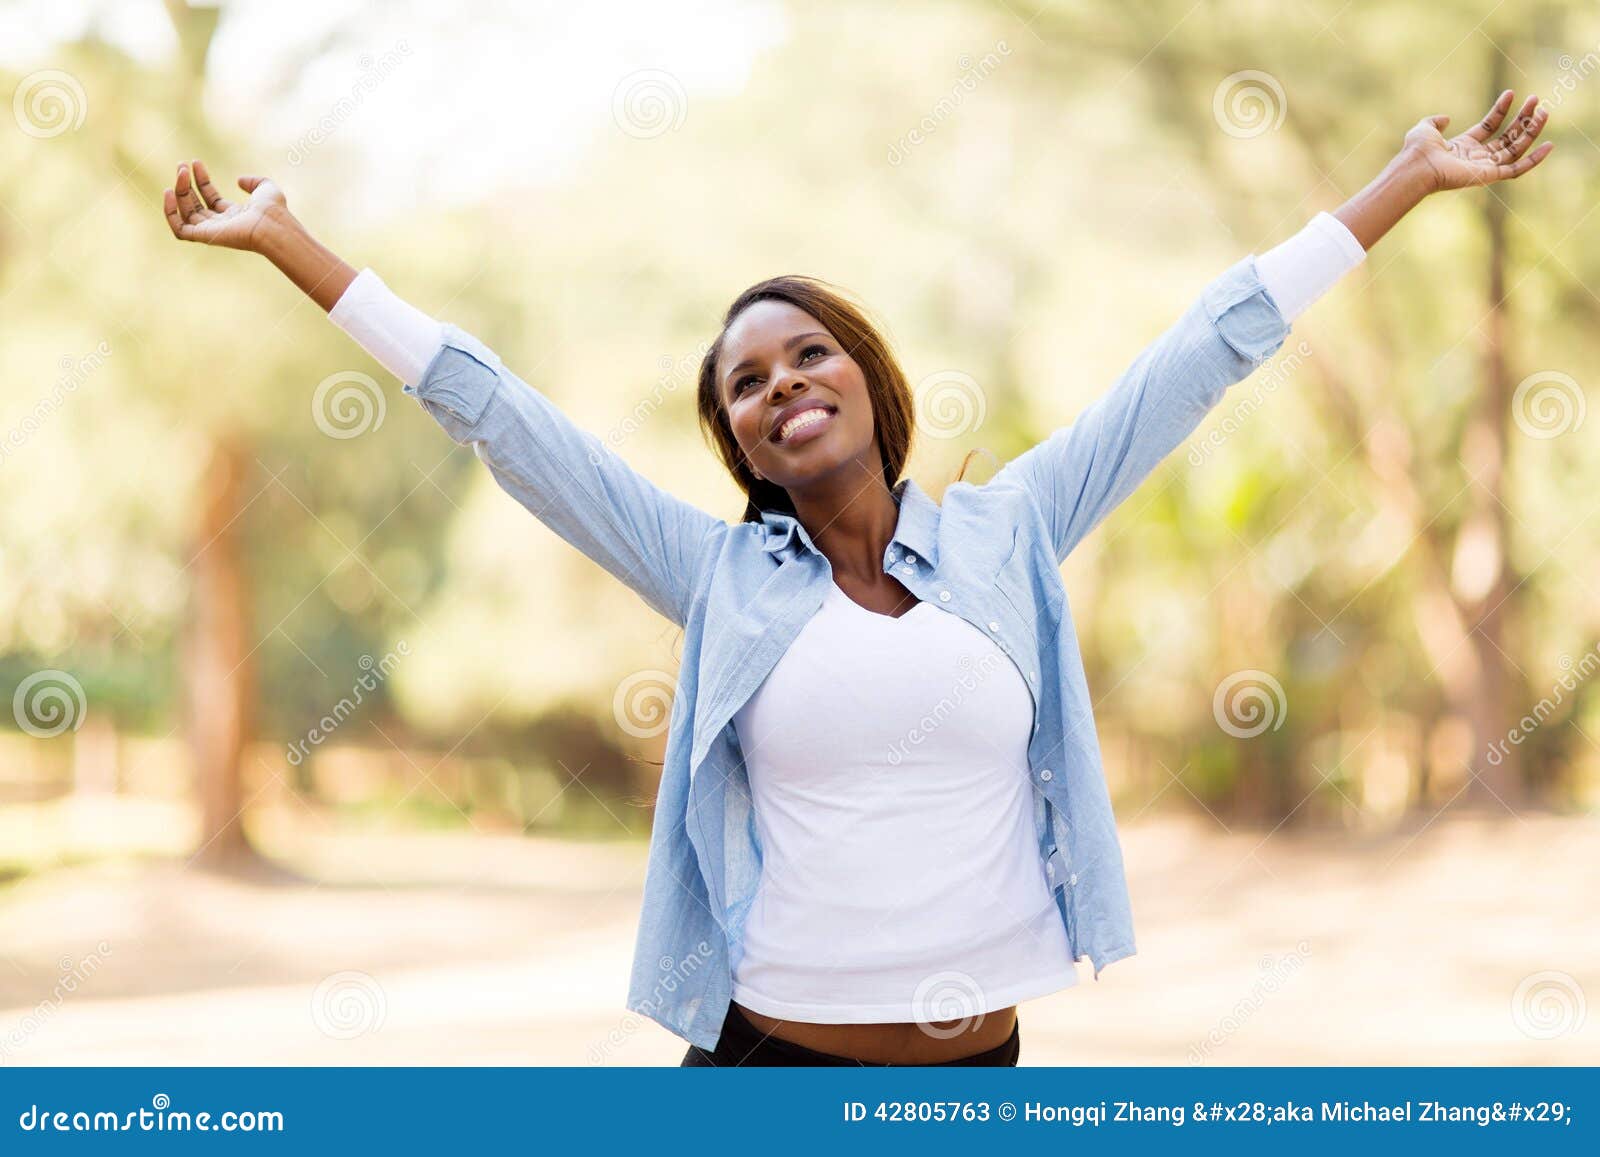 450 African Woman Arms Outstretched Stock Photos - Free & Royalty